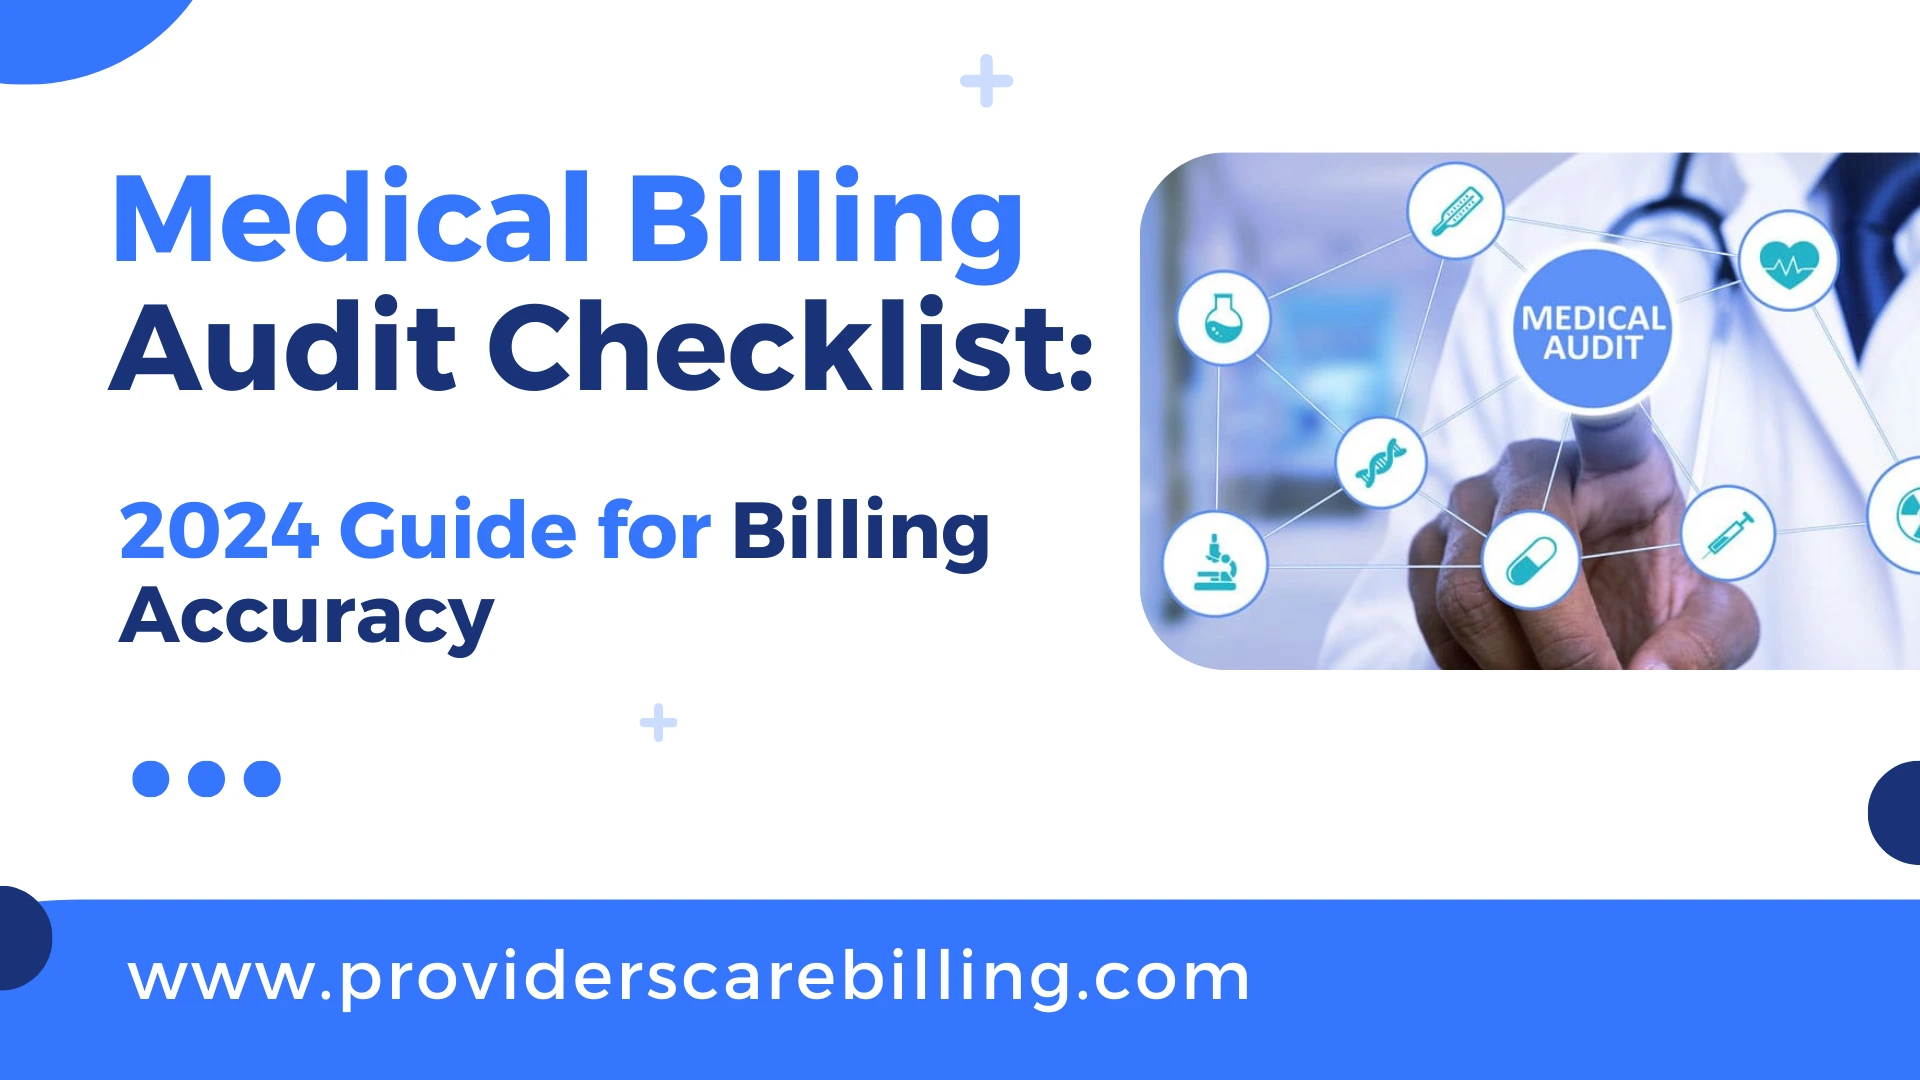 Medical Billing Audit Checklist: 2024 Guide for Billing Accuracy